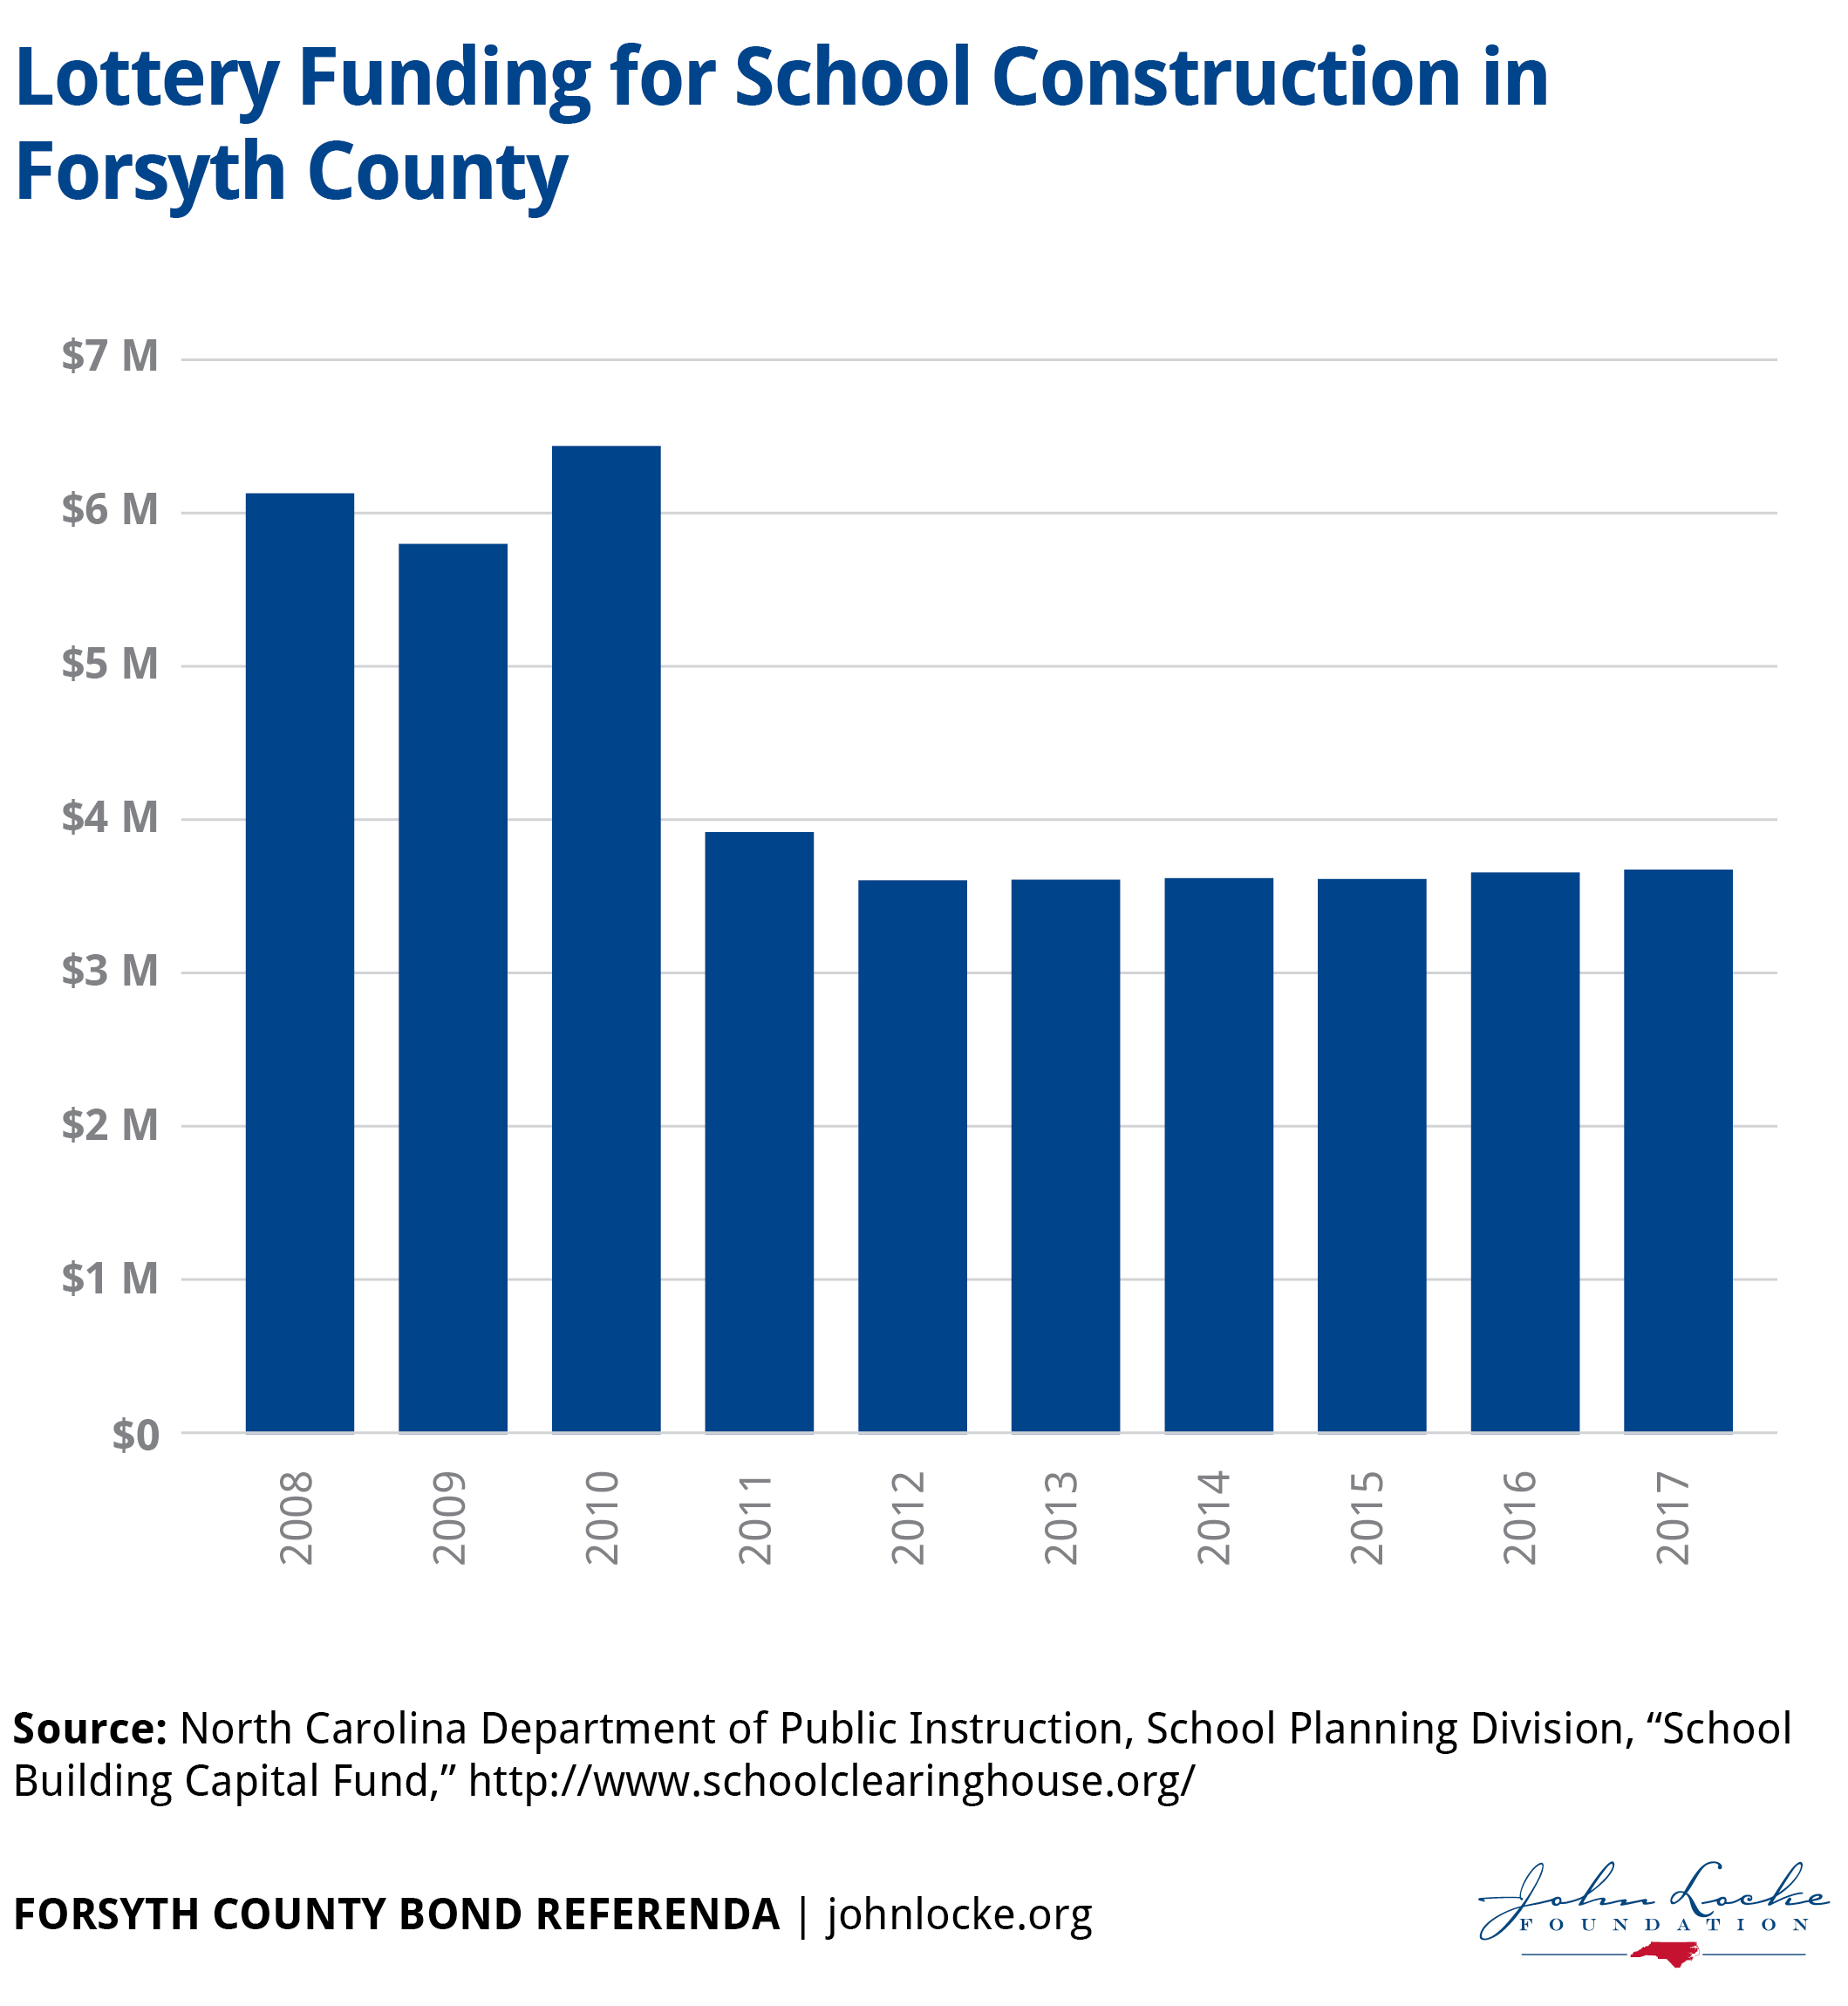 Lottery-Funding-for-School-Construction-in-Forsyth-County